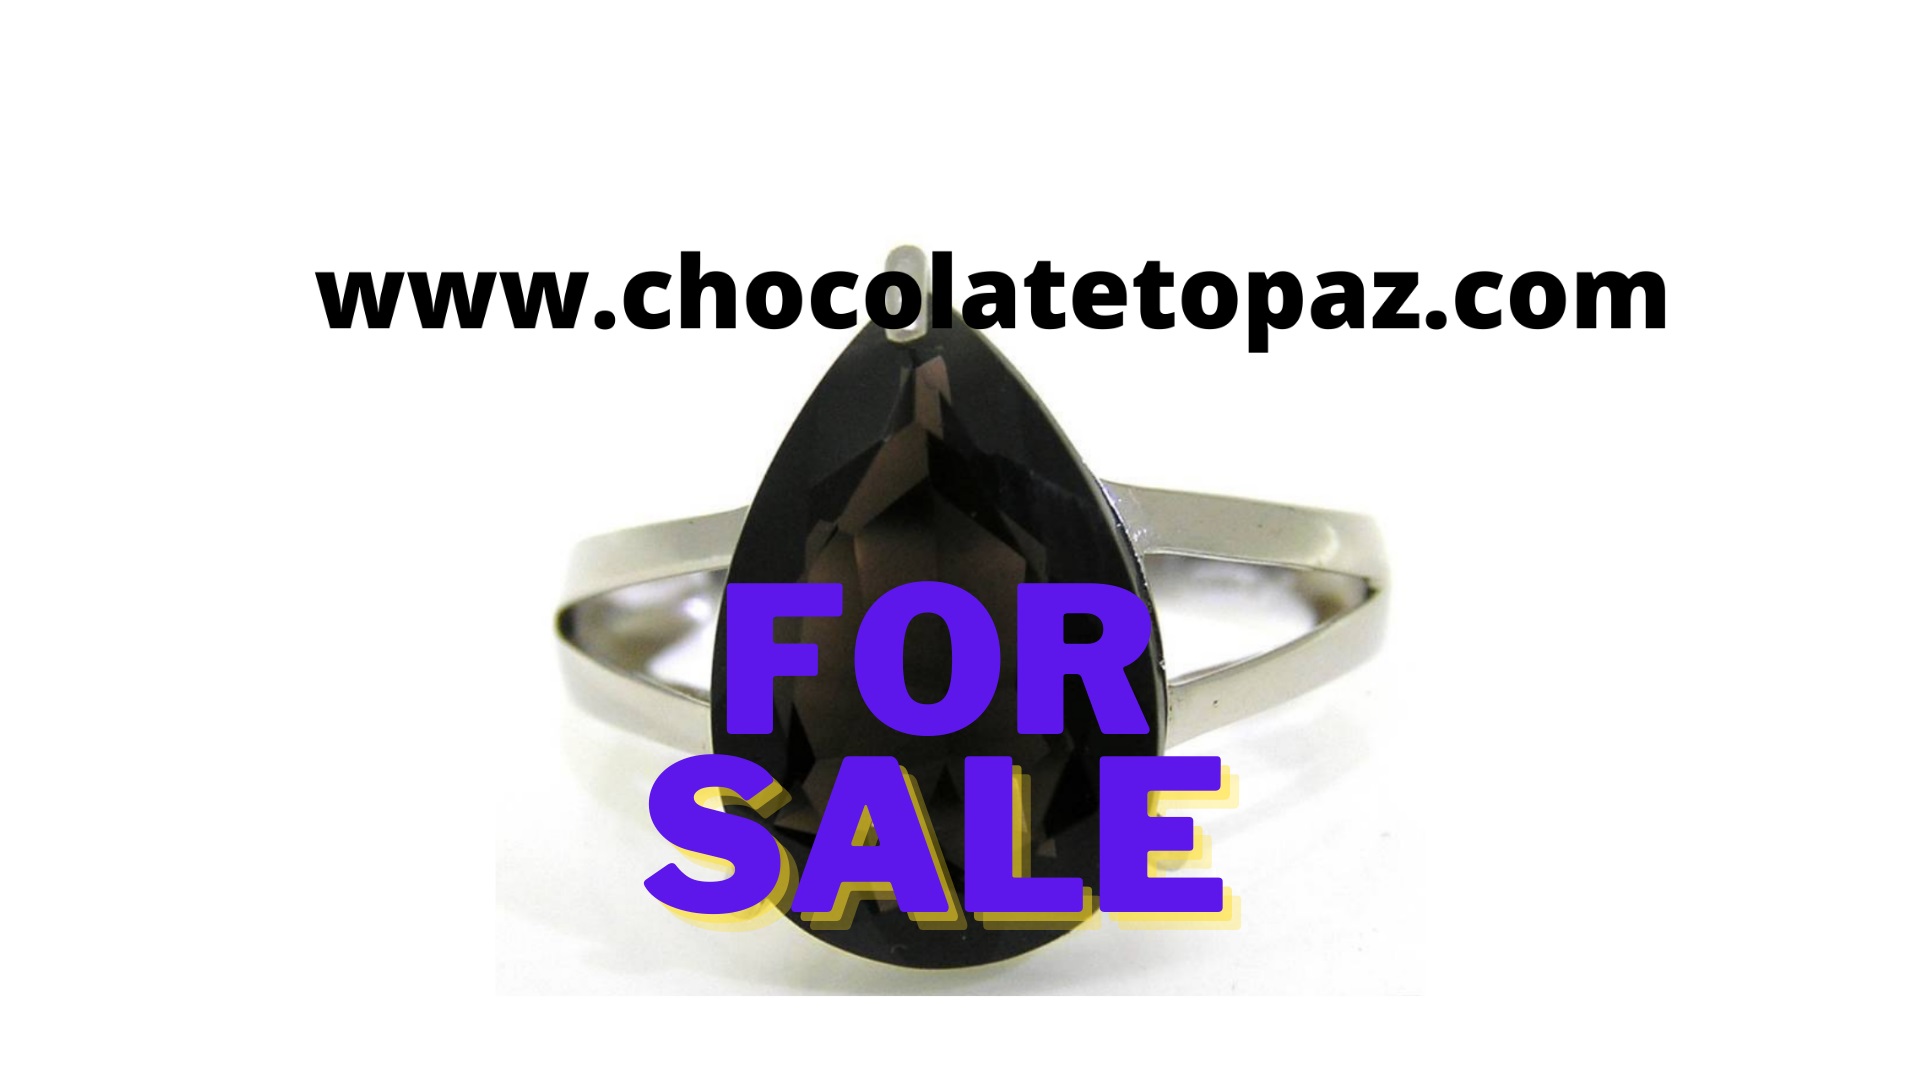 huge chocolate topaz gemstone 9ct white gold ring advertising domain for sale